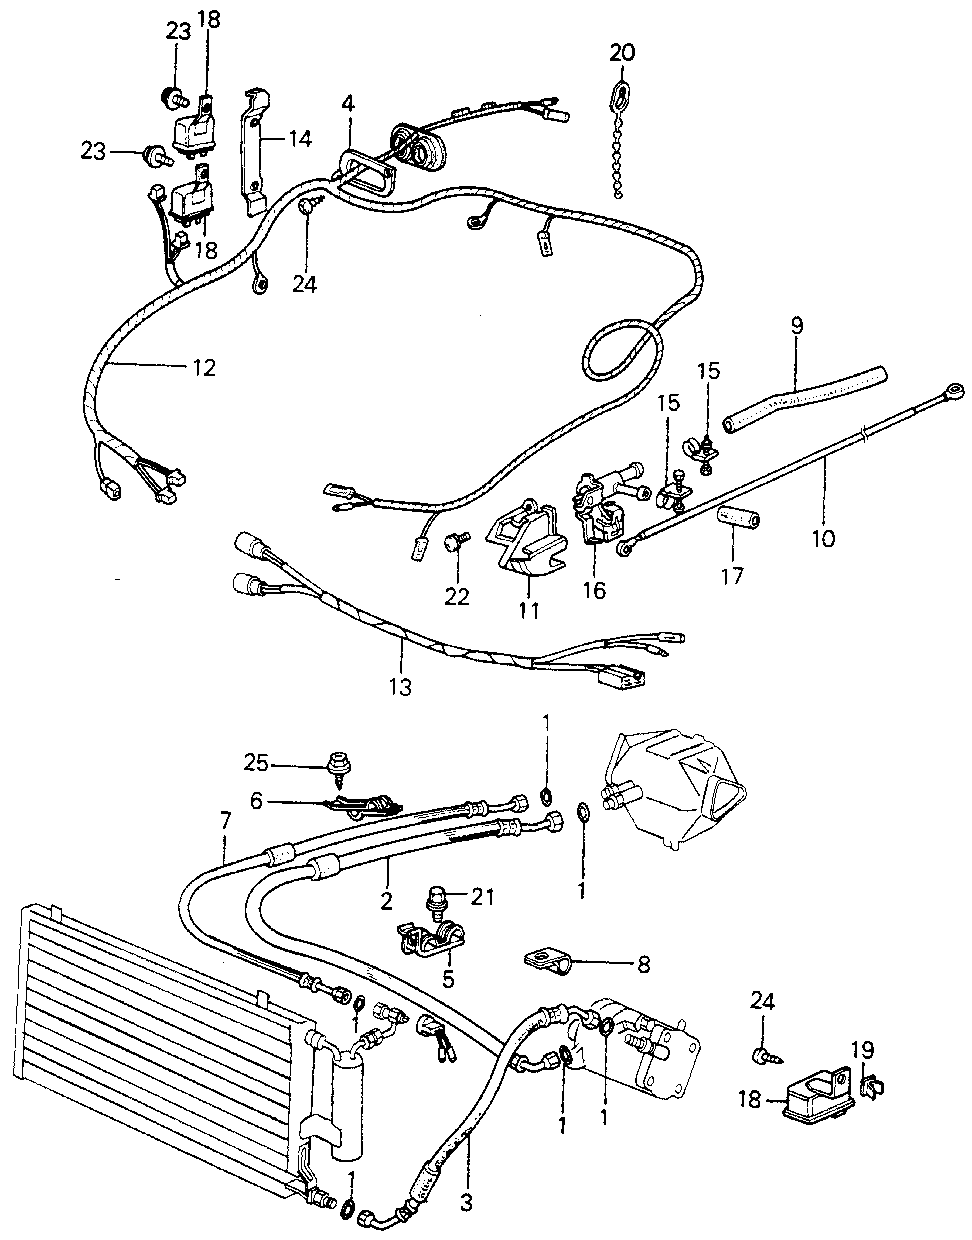 38694-SA0-003 - COVER, WATER VALVE DUST